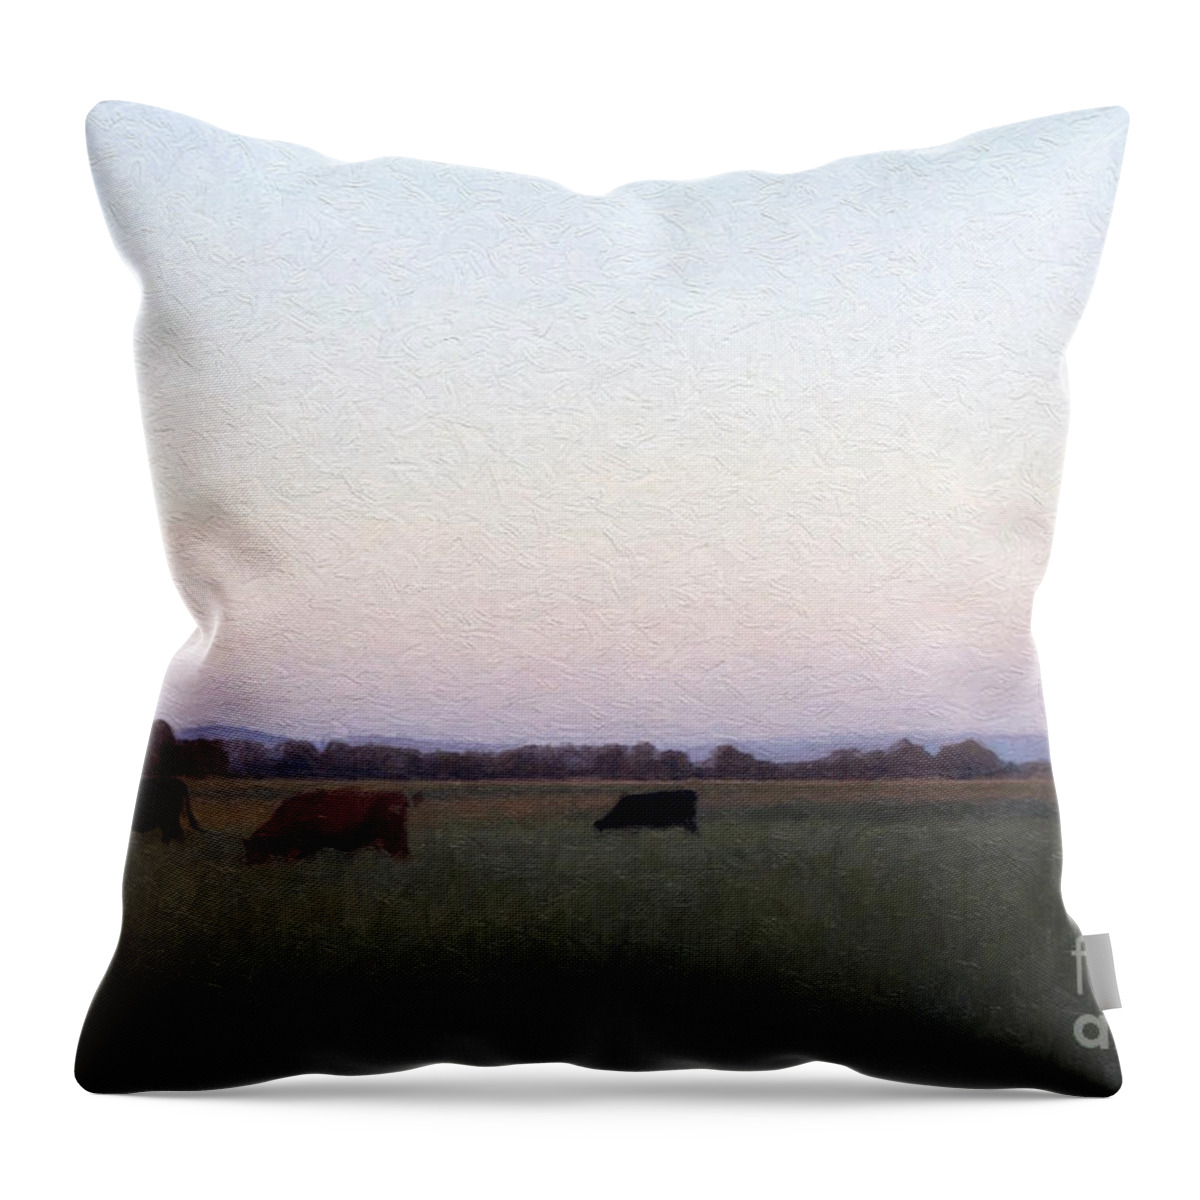 Cattle Throw Pillow featuring the photograph The Kittitas Valley II by Susan Parish